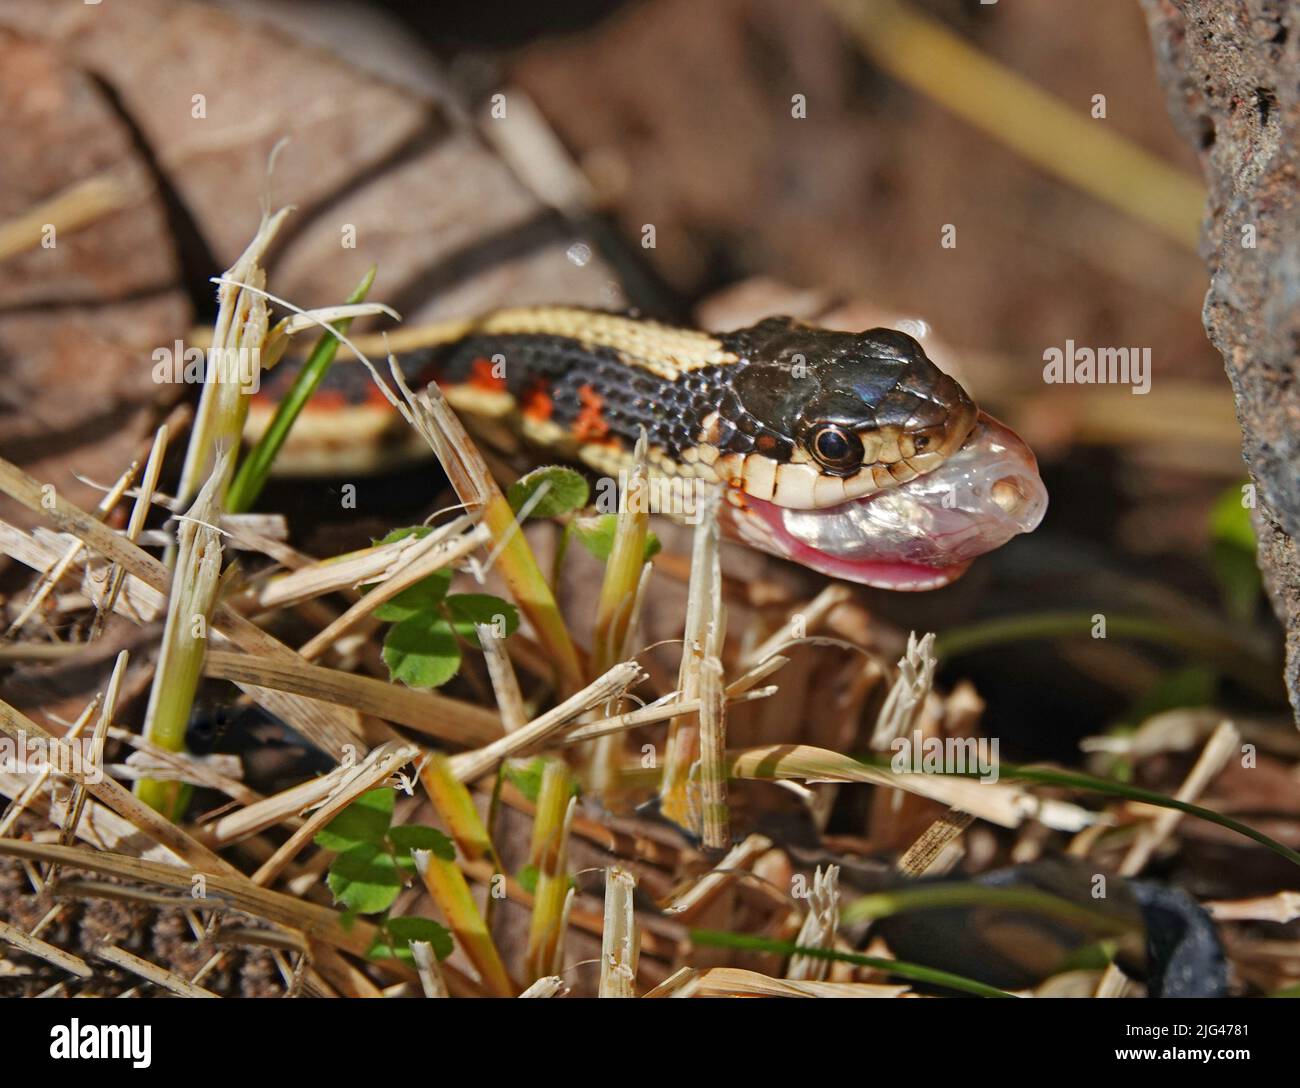 A small garter snake, capturing and attempting to swallow a minnow, in a pond in central Oregon. Stock Photo